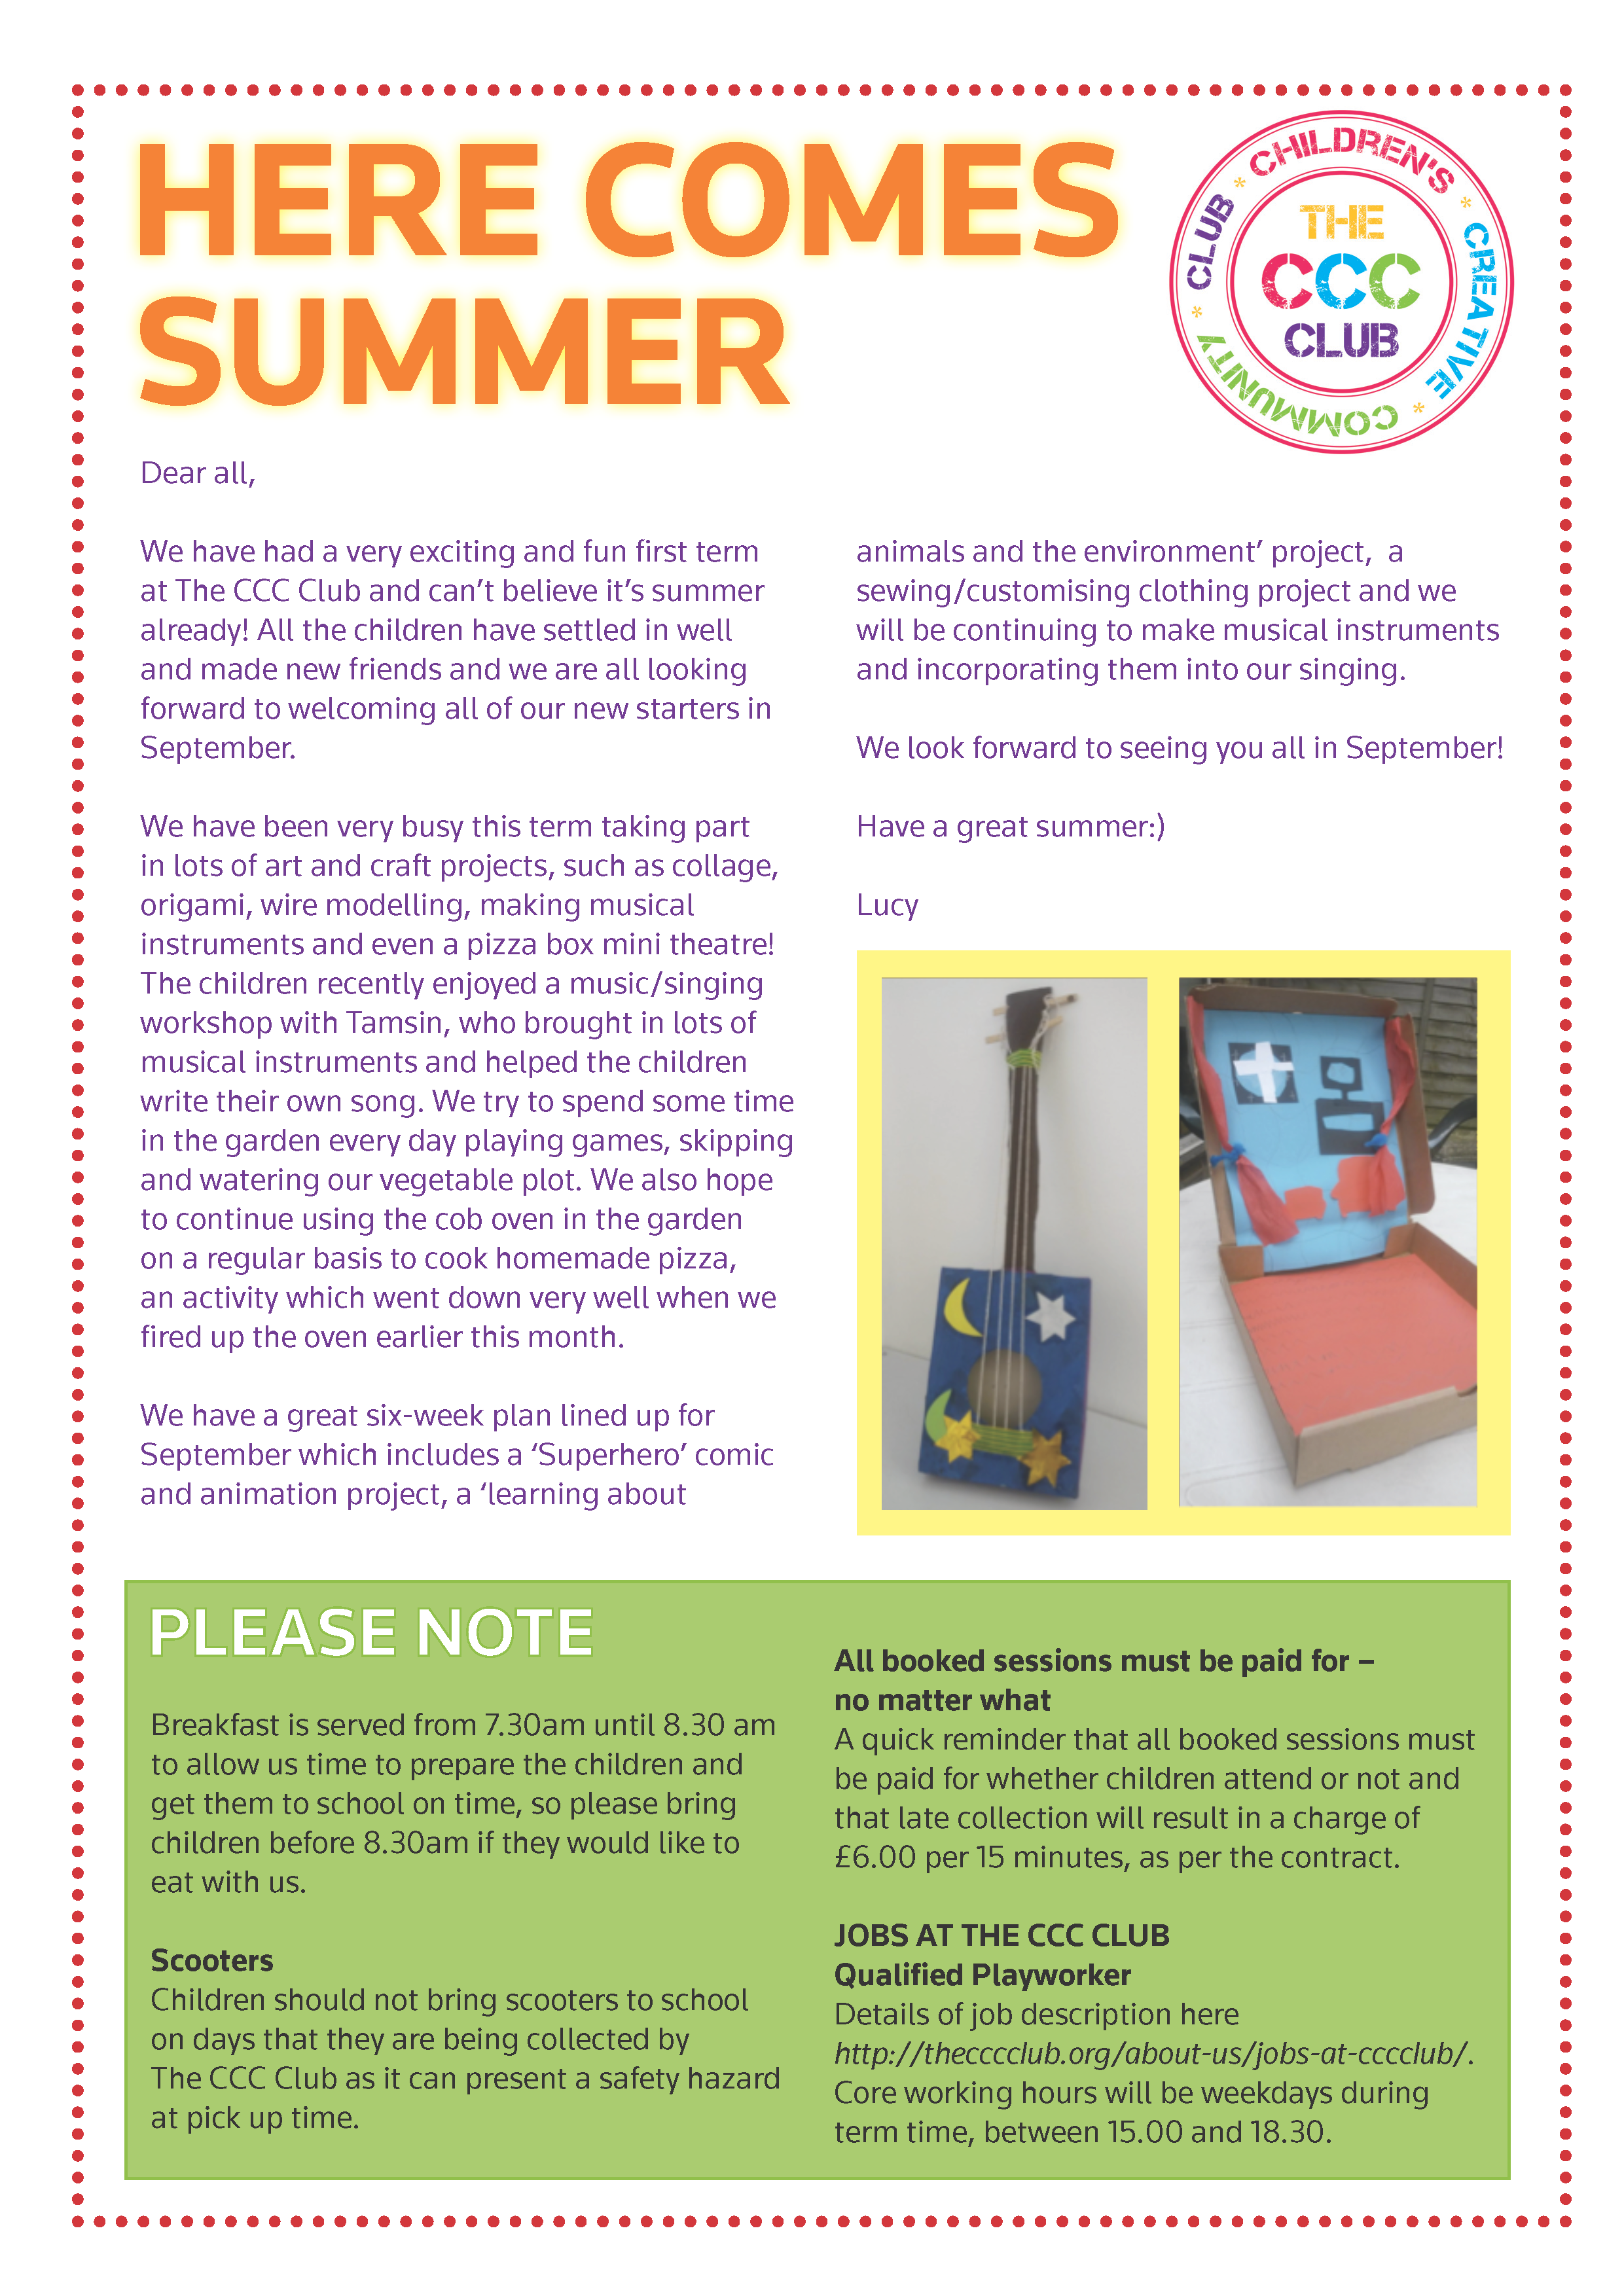 The Best Ideas for Summer Newsletters Ideas Home, Family, Style and